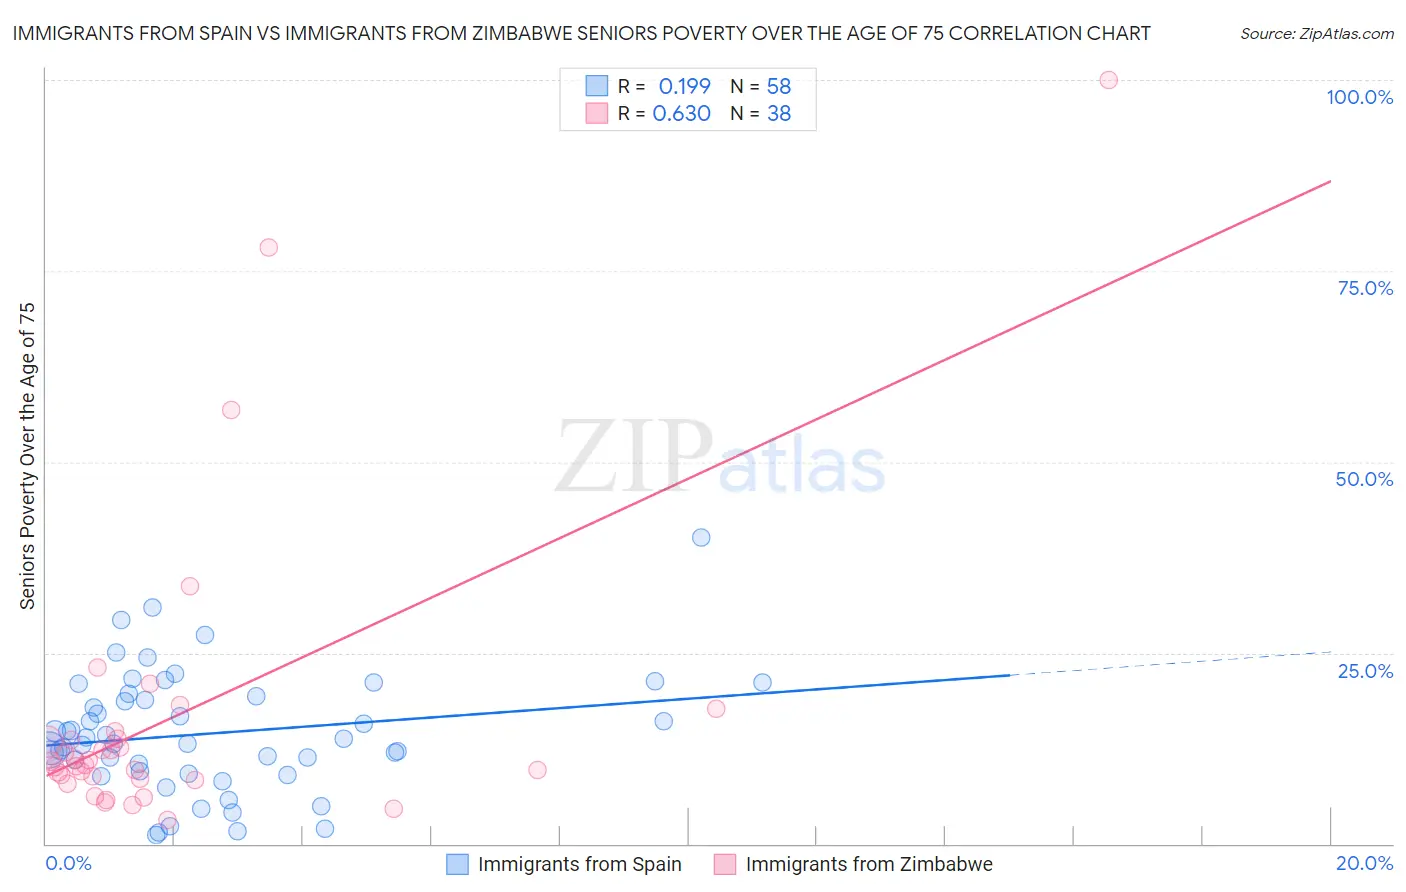 Immigrants from Spain vs Immigrants from Zimbabwe Seniors Poverty Over the Age of 75